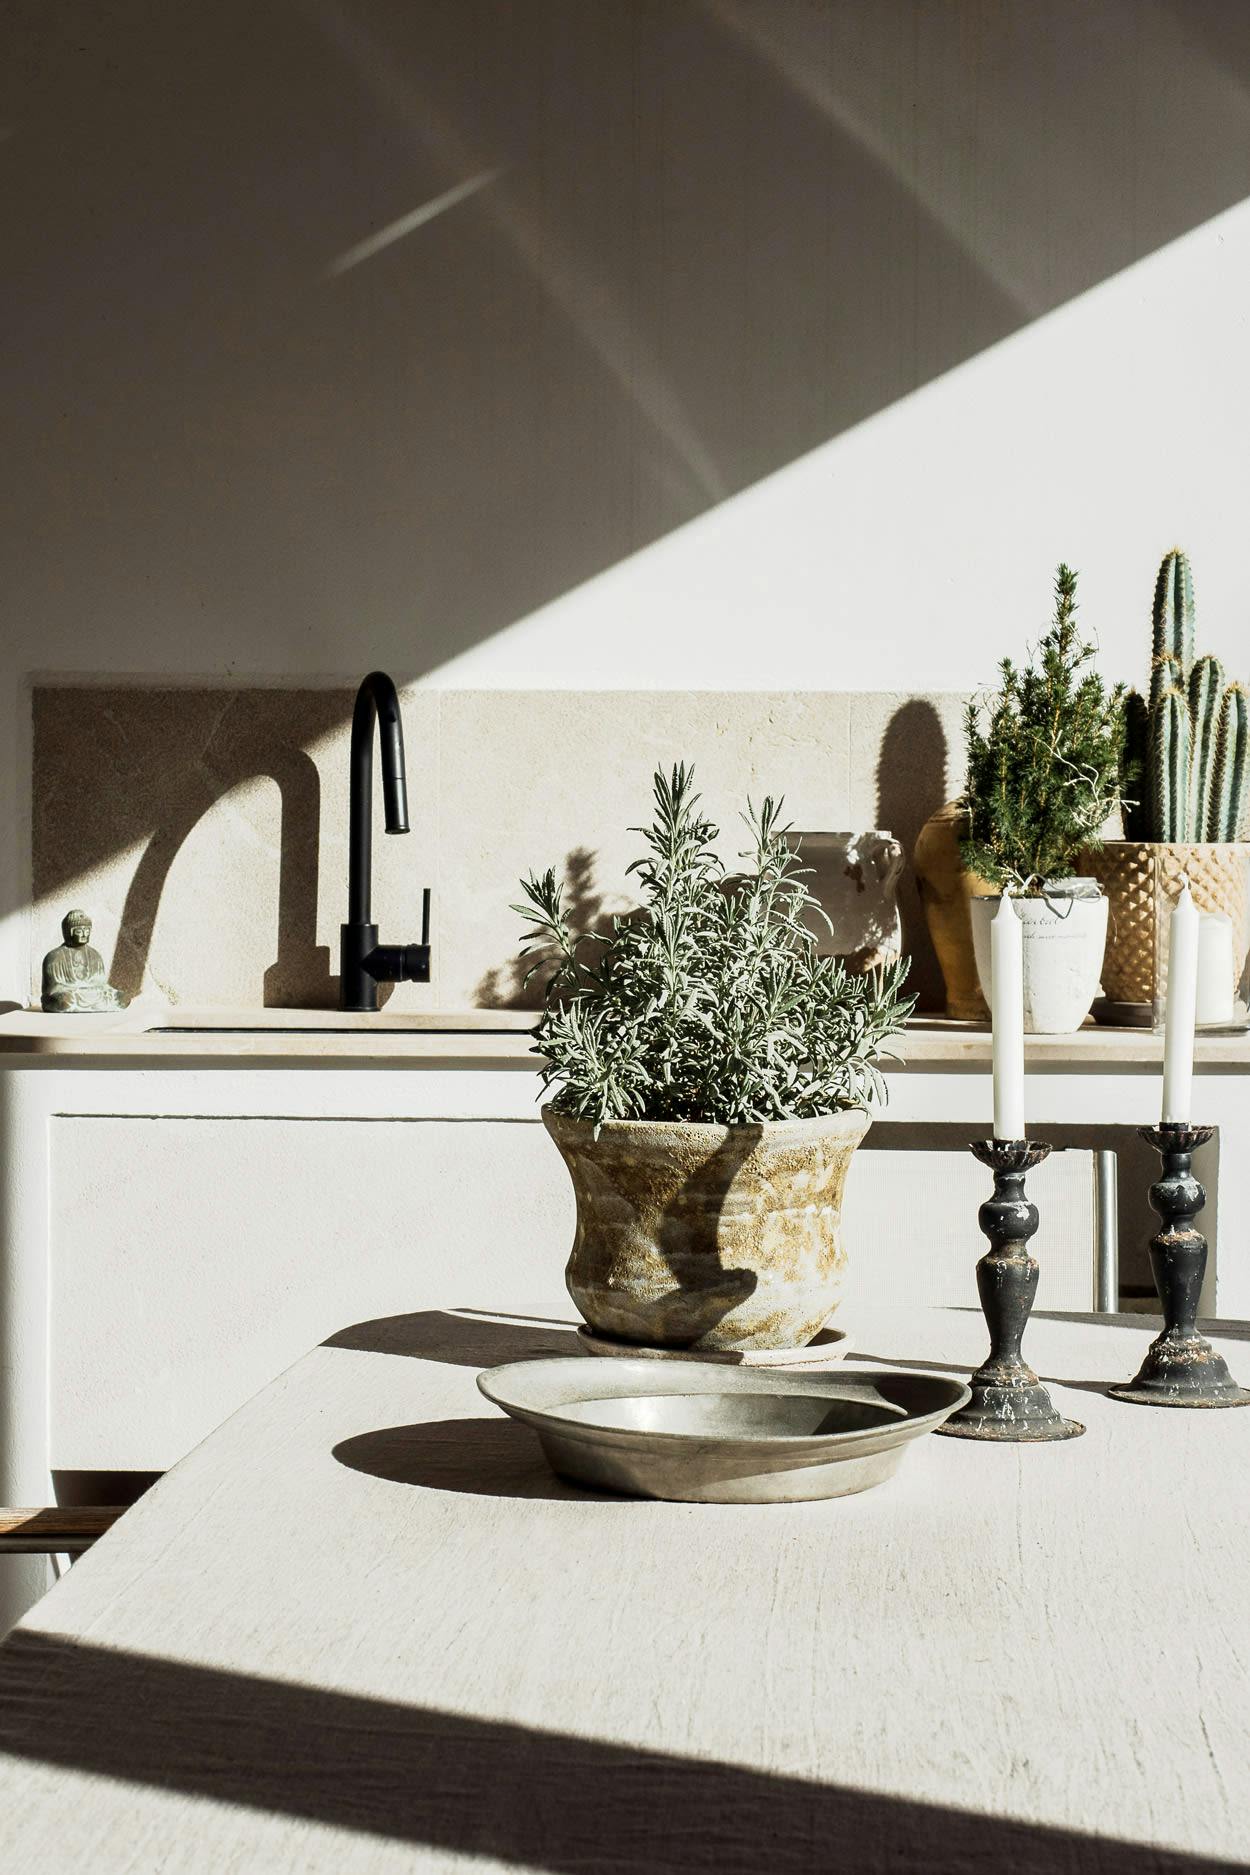 The image features a kitchen counter with a white countertop, a potted plant, a vase, and a bowl.